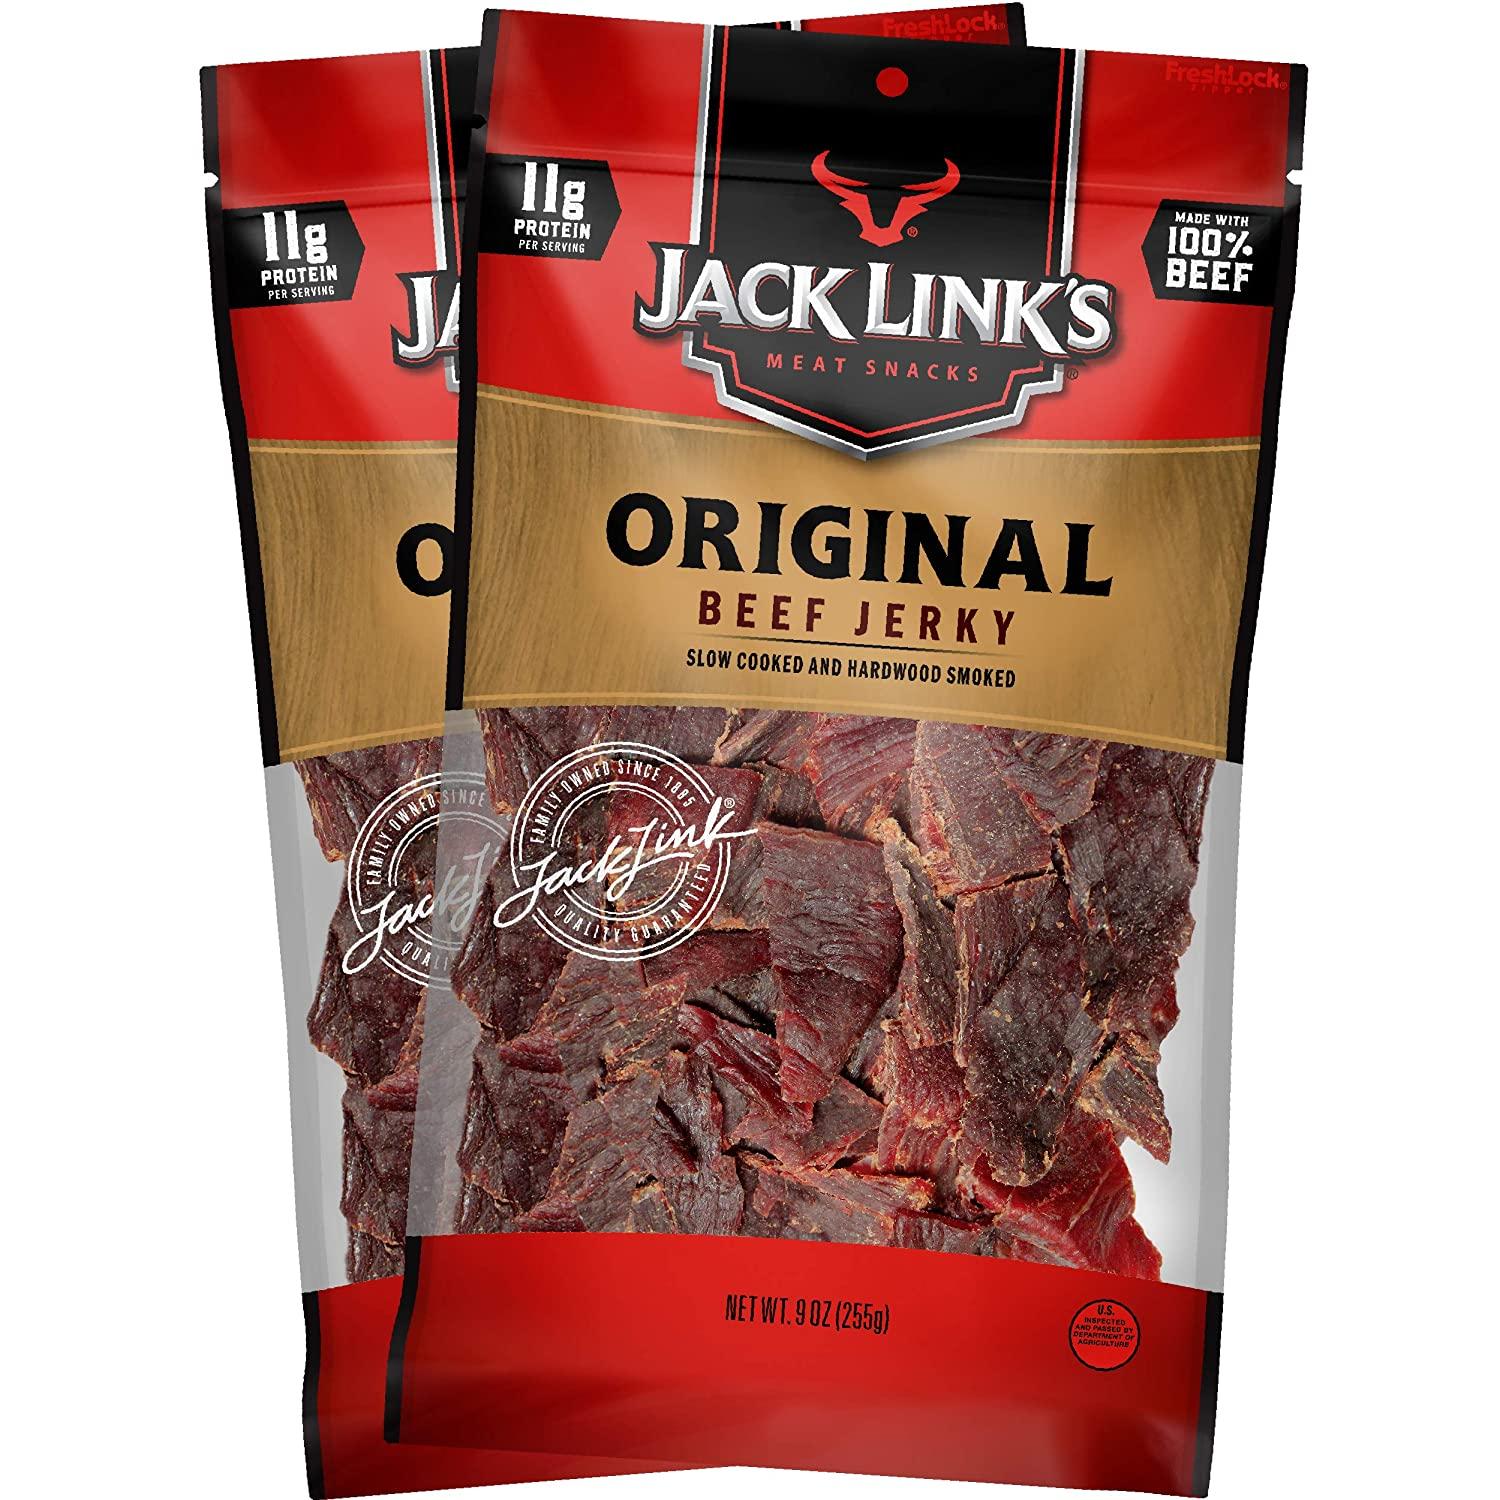 2 Jack Links Beef Jerky for $14.99 Shipped